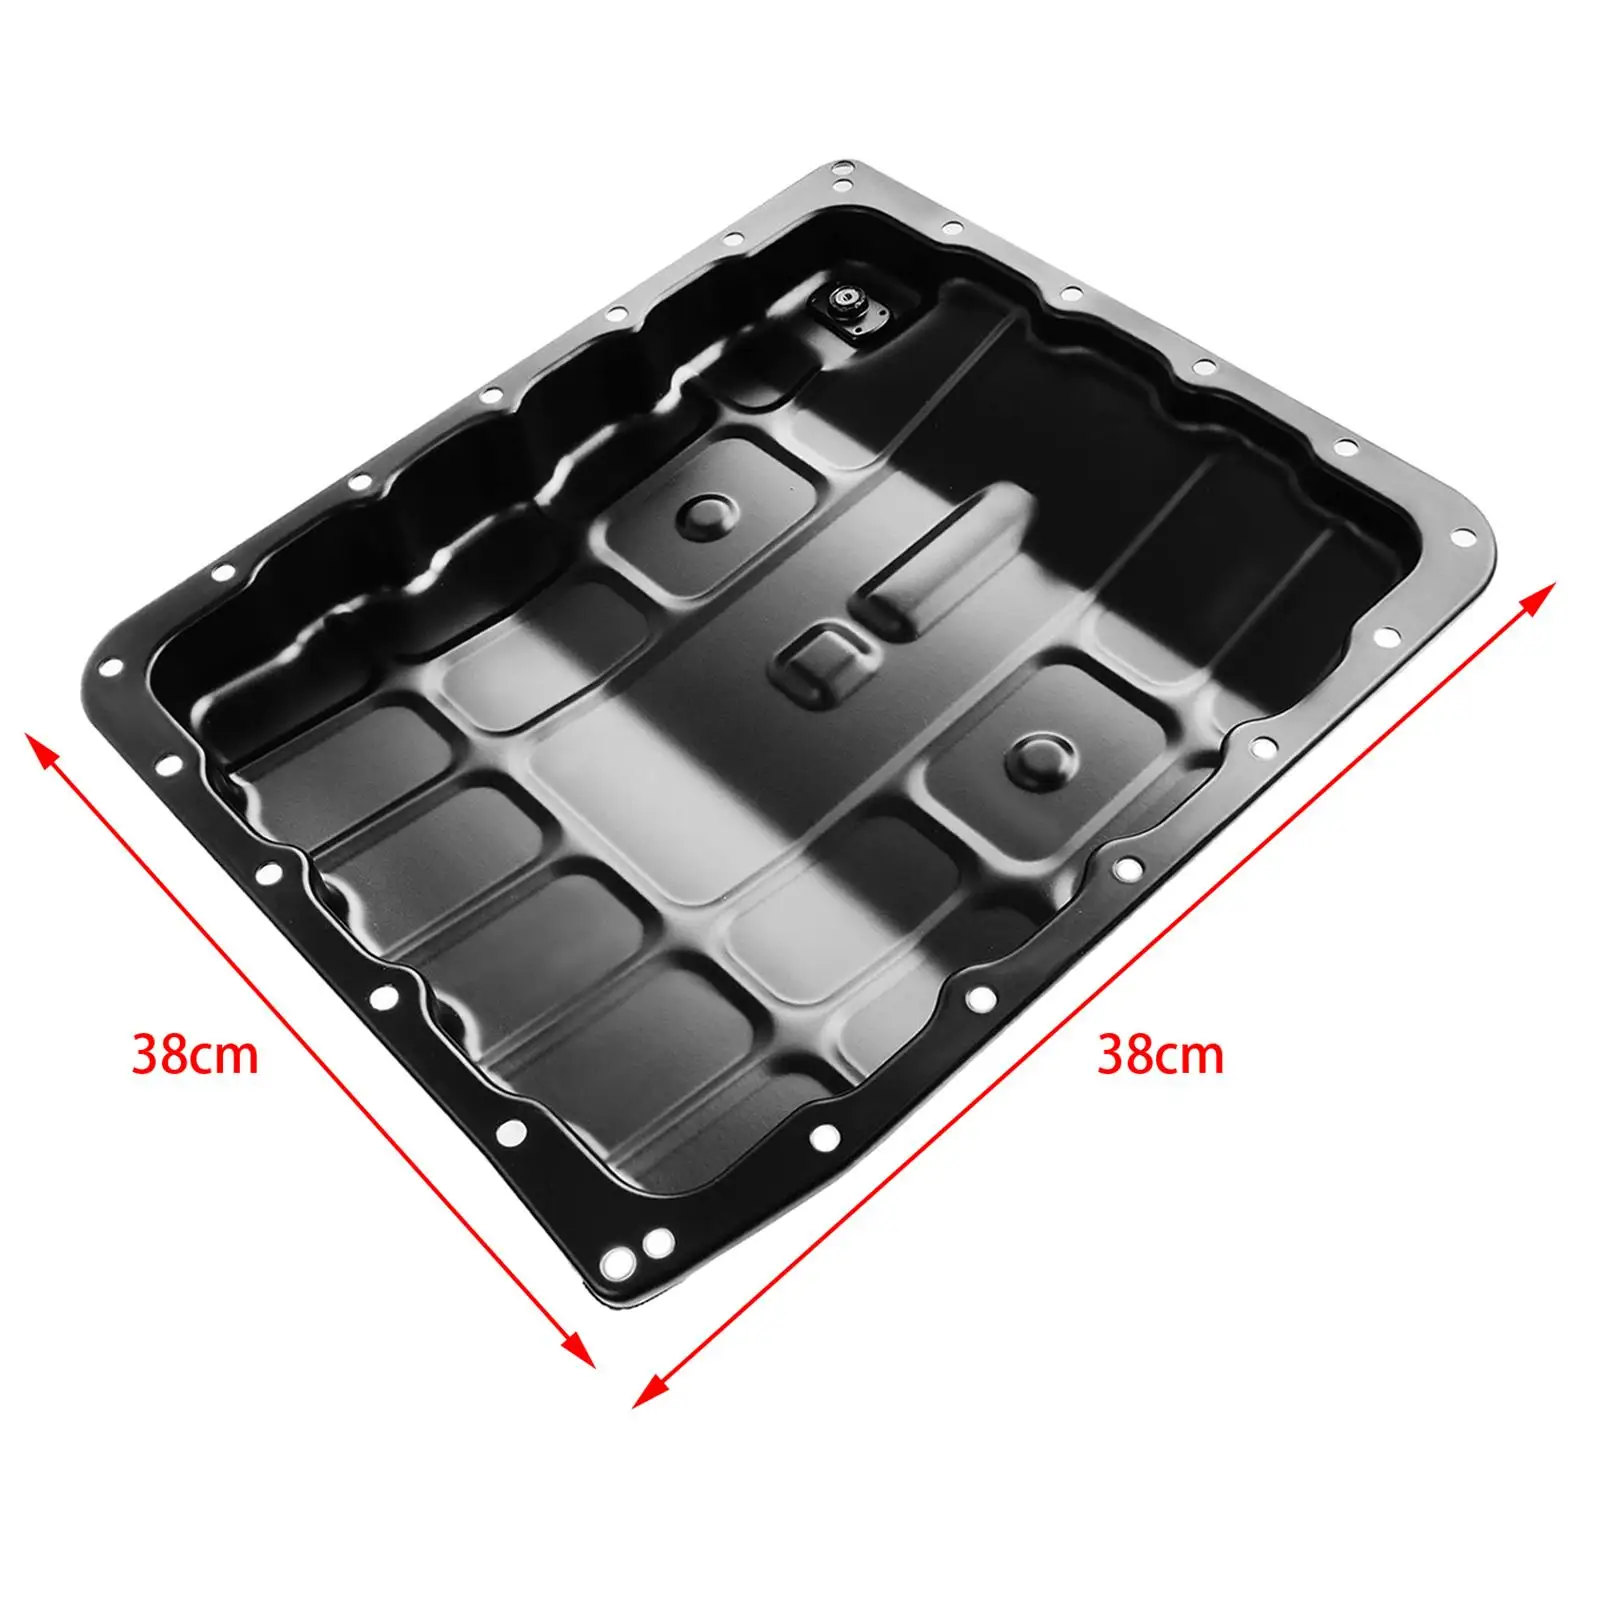 Transmission Oil Pan 3139090x00 Supplies Durable Replaces Accessory Automobile for Nissan Armada Pathfinder Titan Frontier